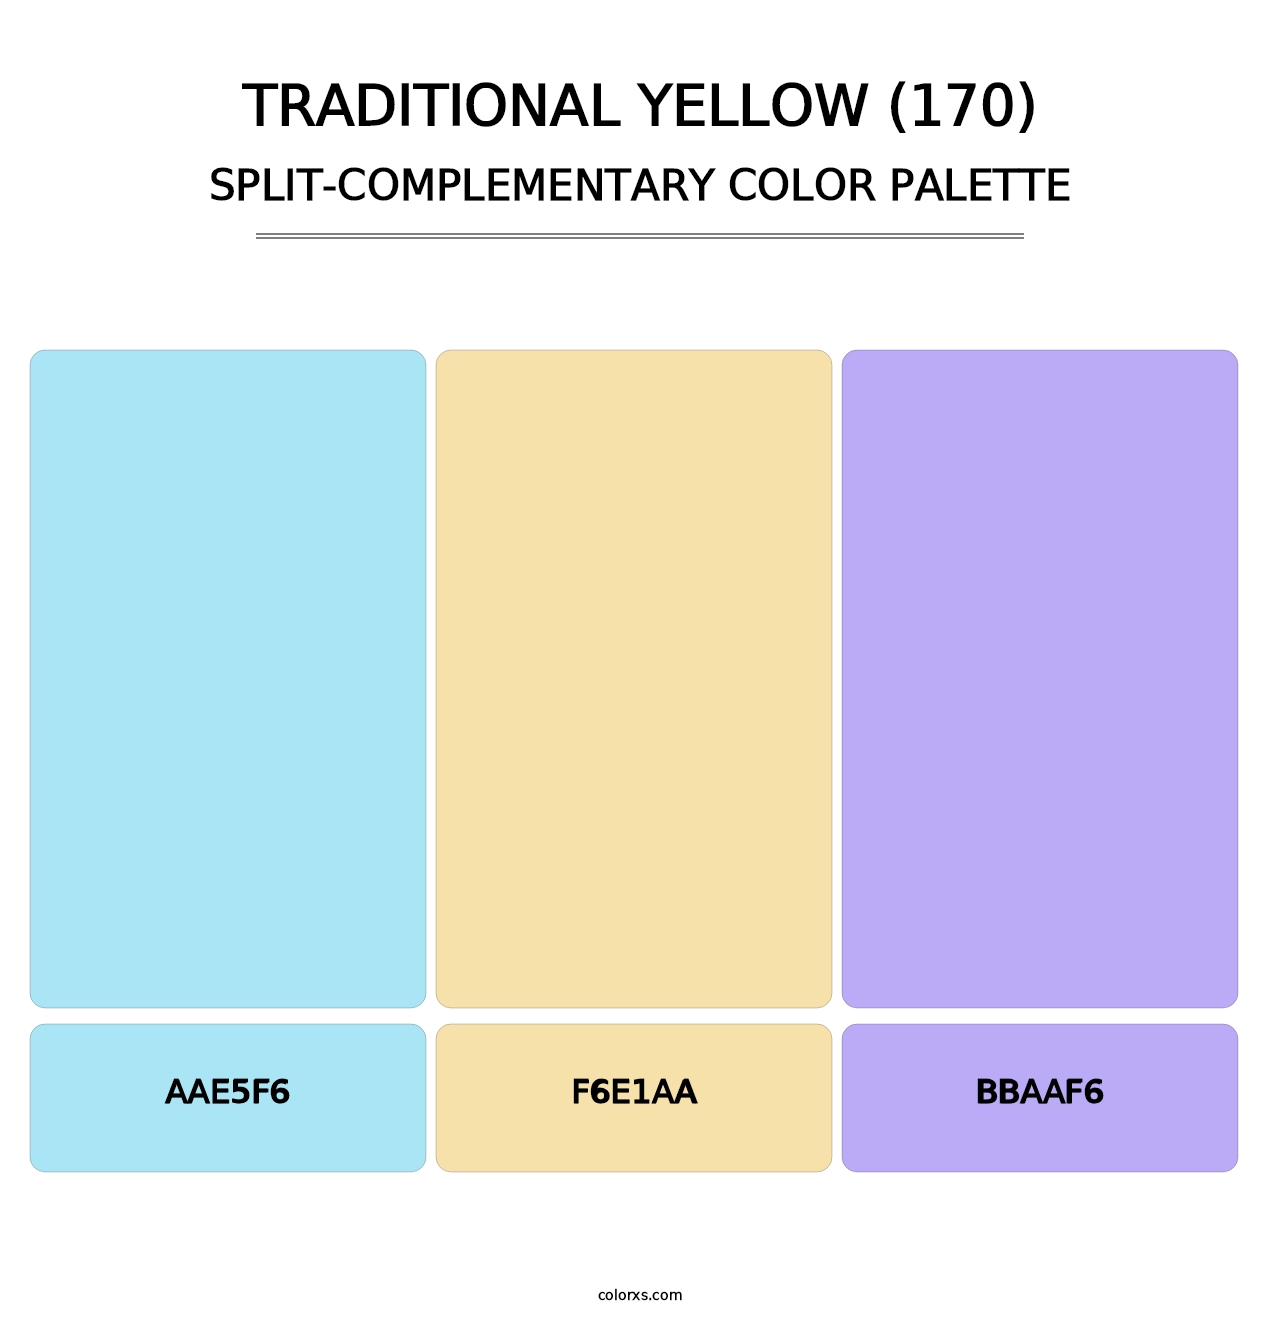 Traditional Yellow (170) - Split-Complementary Color Palette